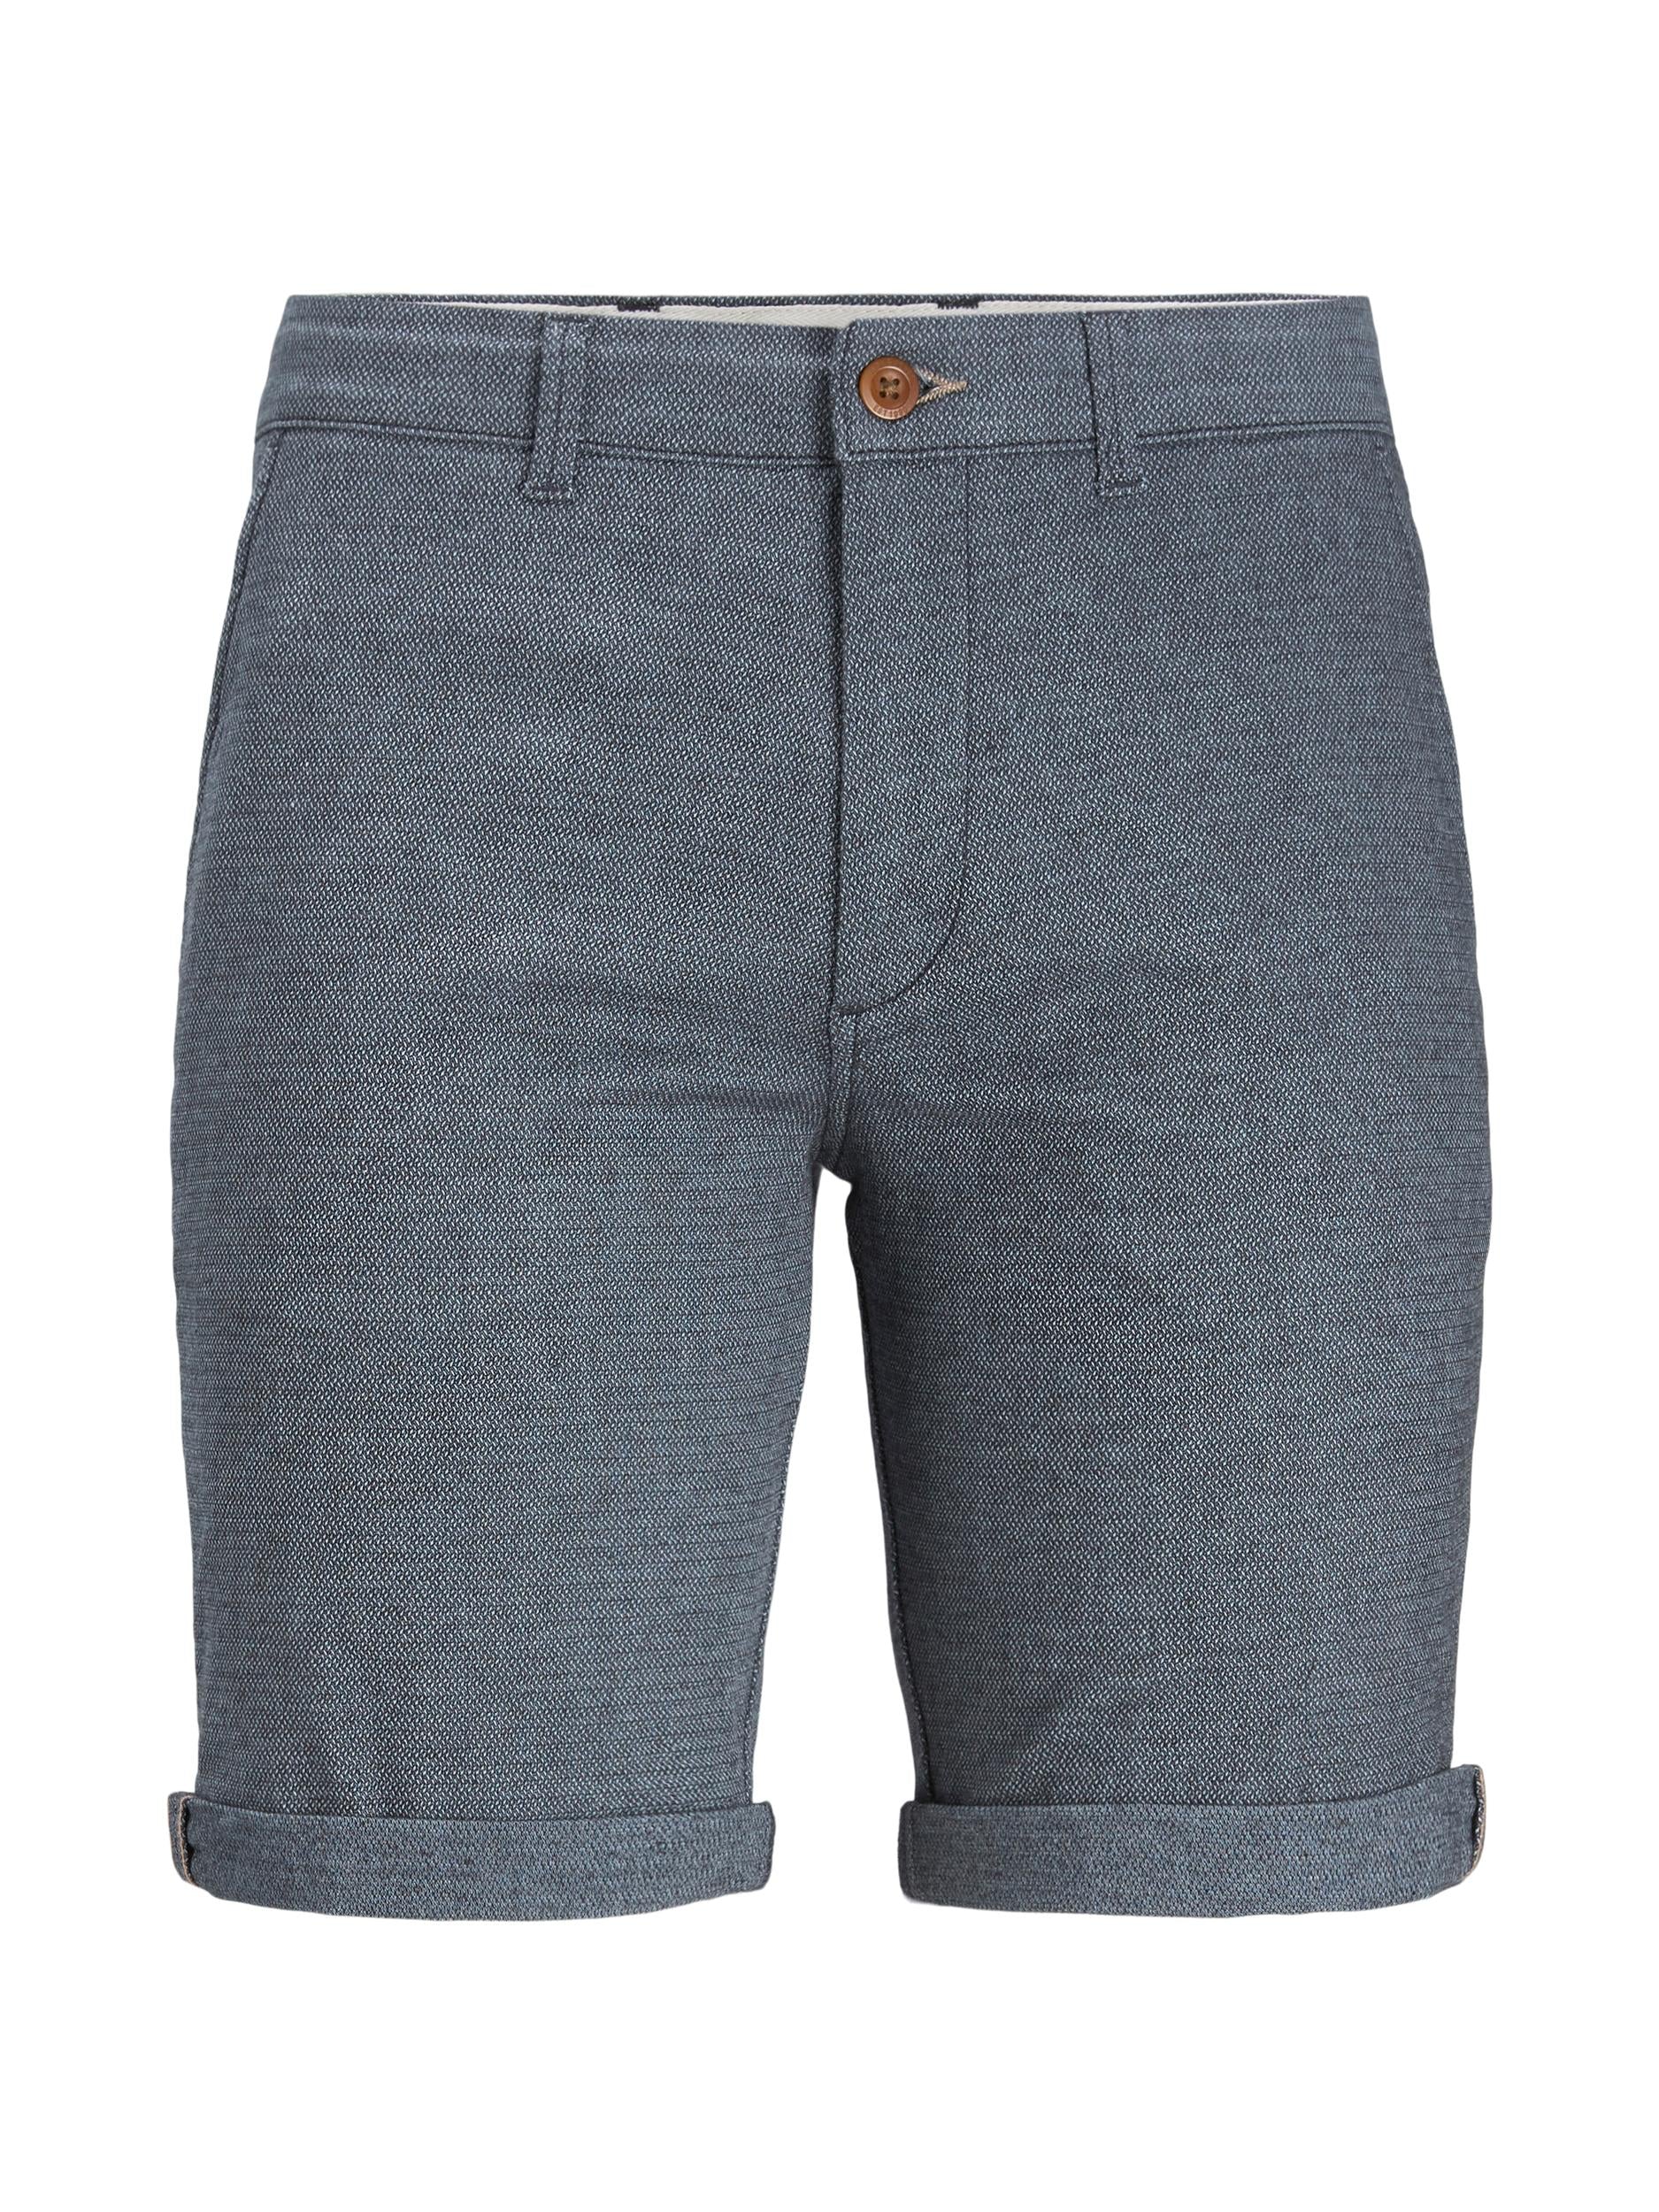 Men's Fury Shorts Faded Denim-Ghost Front View